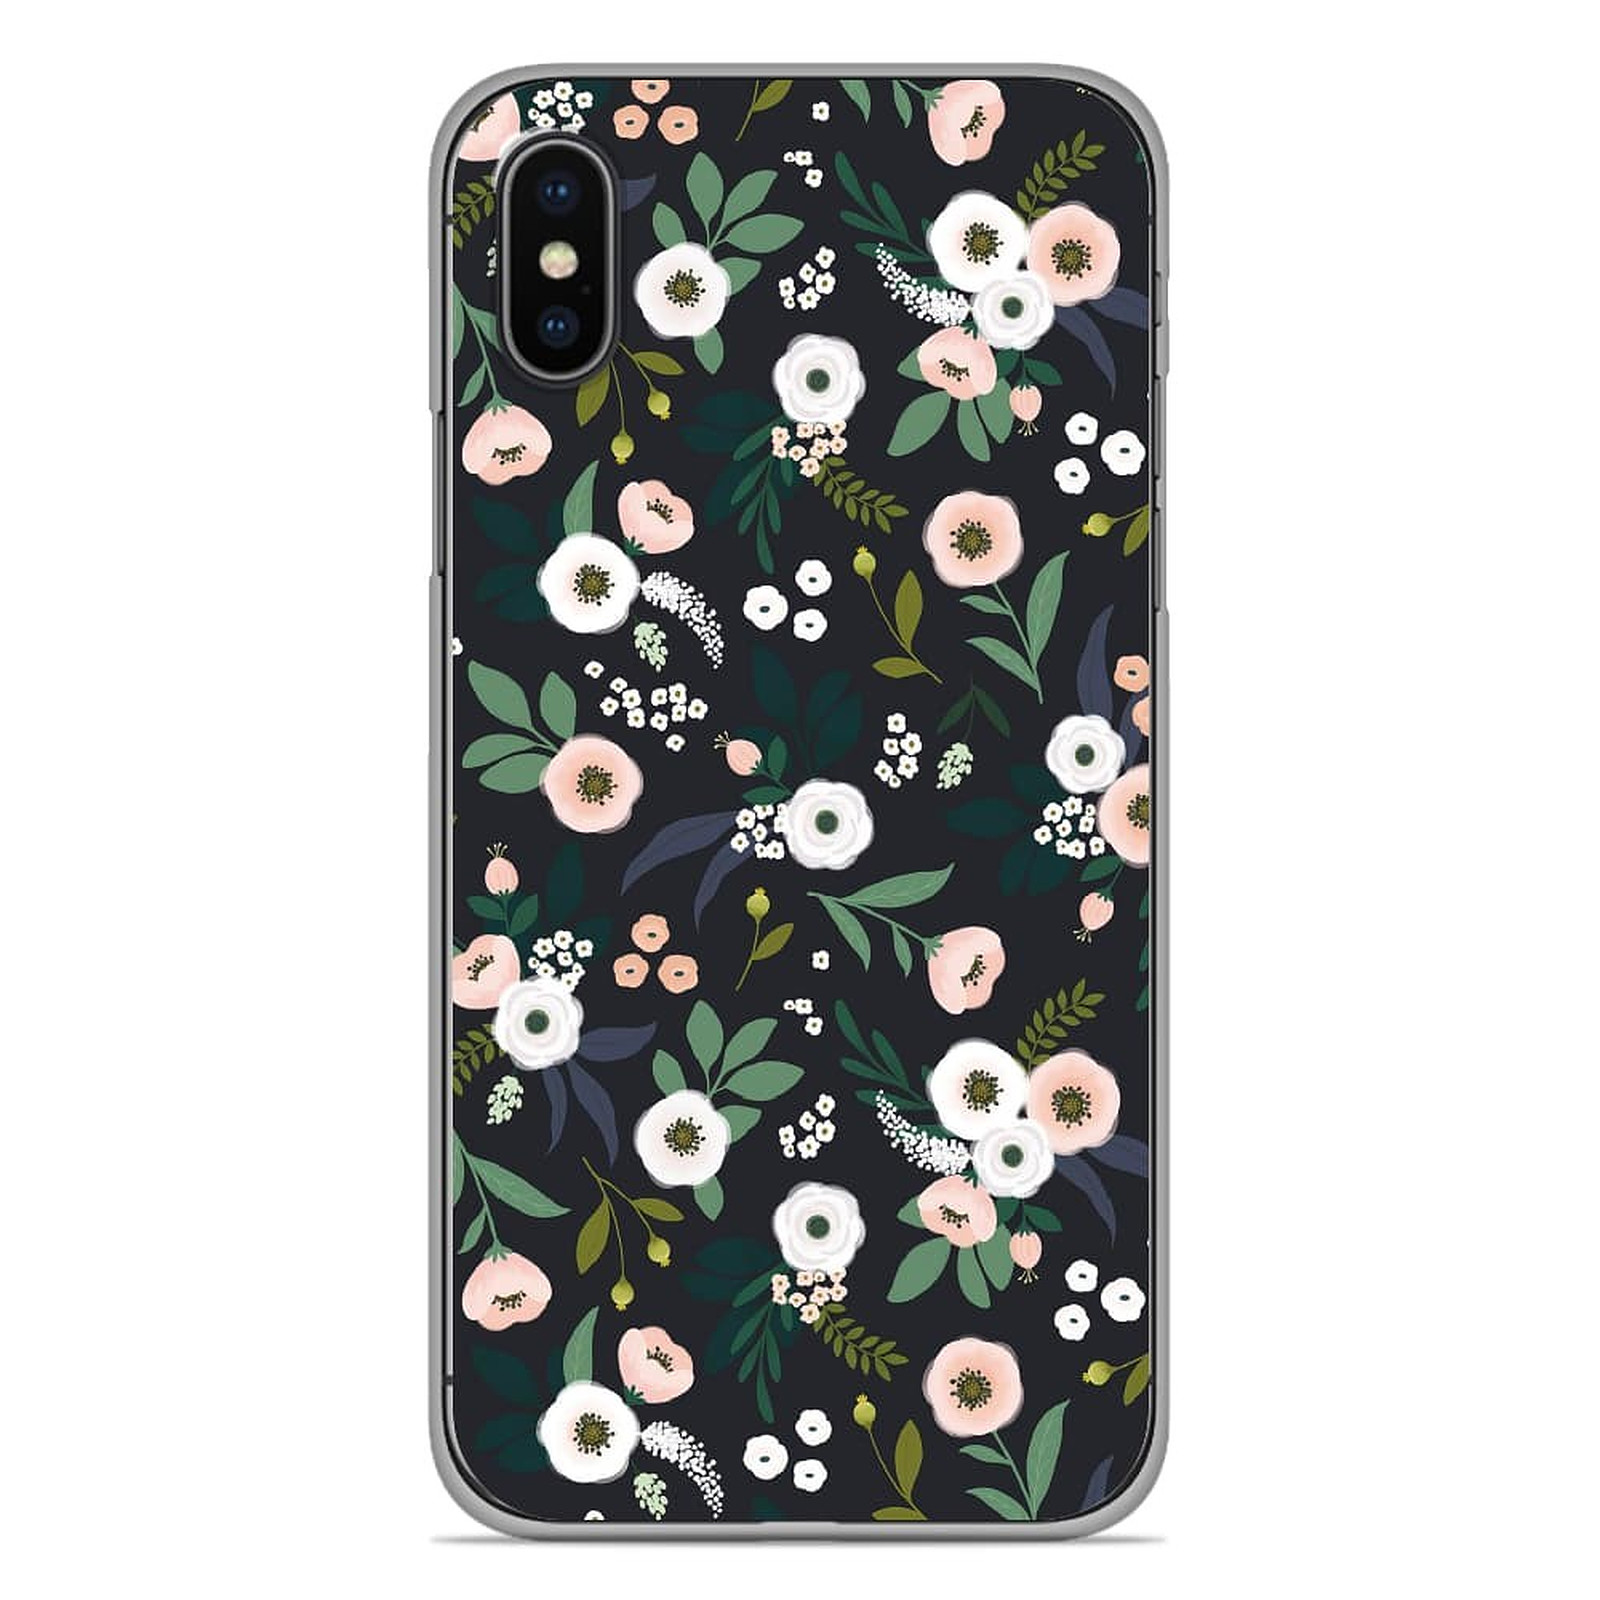 1001 Coques Coque silicone gel Apple iPhone X / XS motif Flowers Noir - Coque telephone 1001Coques